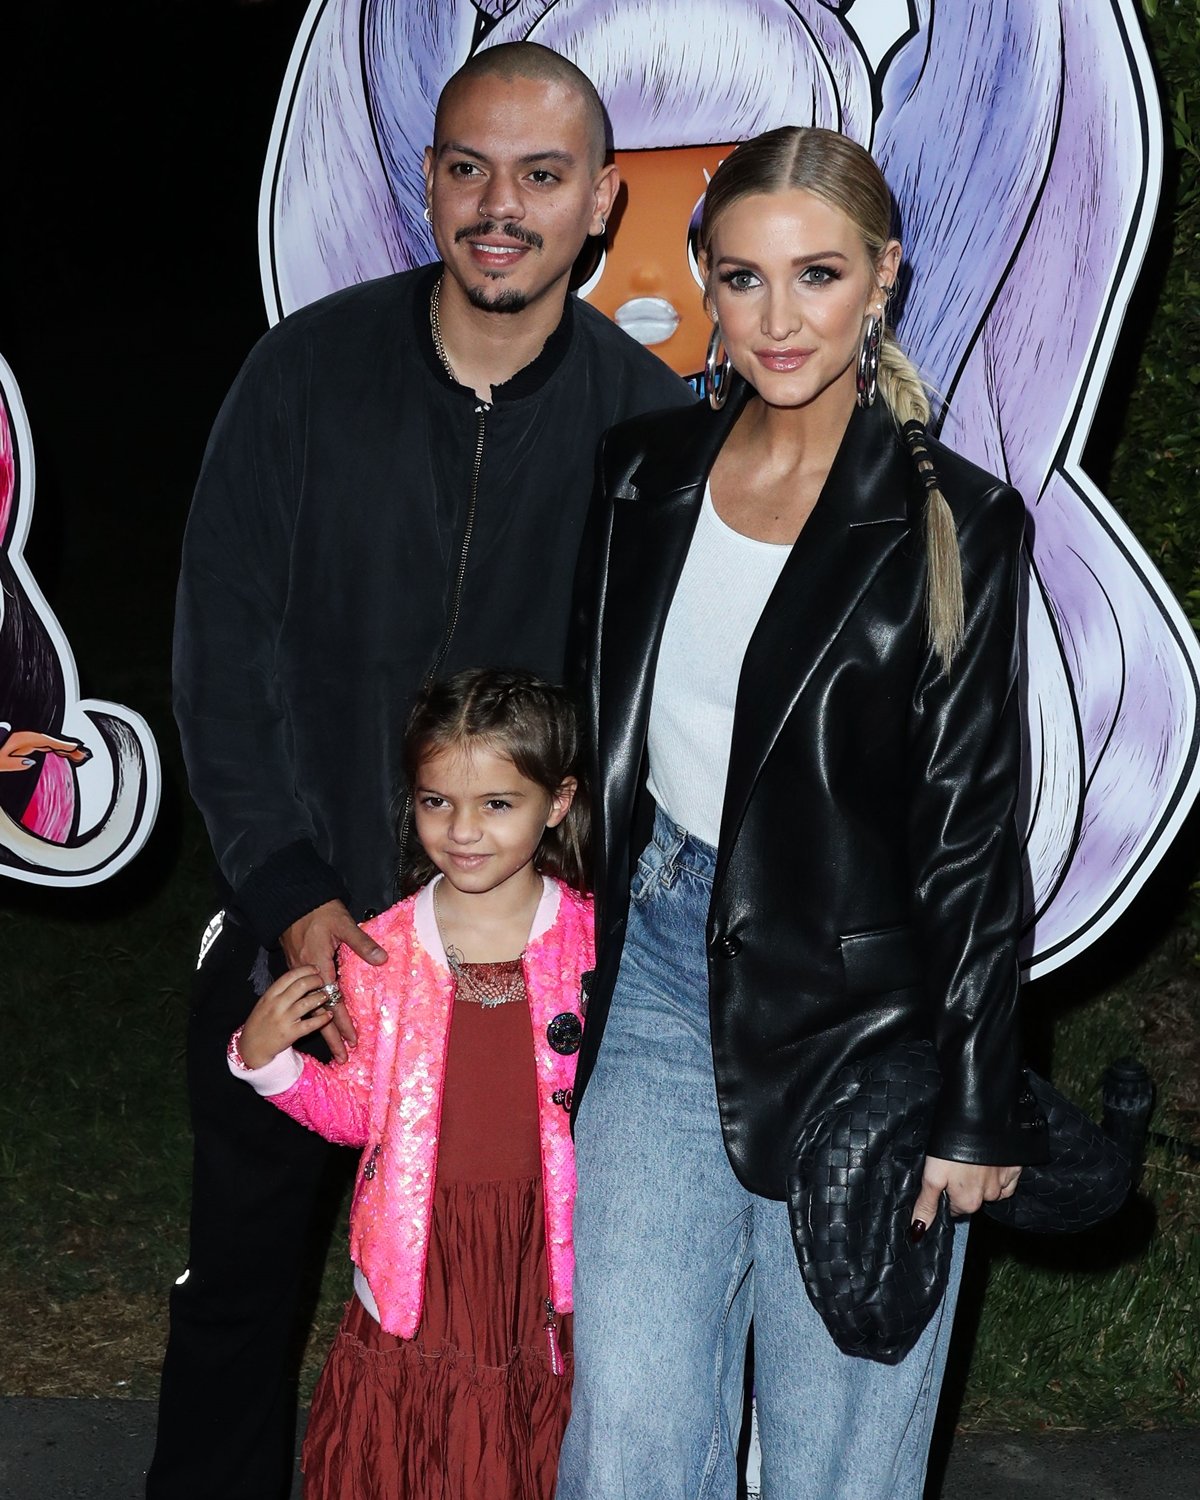 Evan Ross, Ashlee Simpson, and their daughter Jagger Snow Ross at the premiere of 'L.O.L Surprise!'